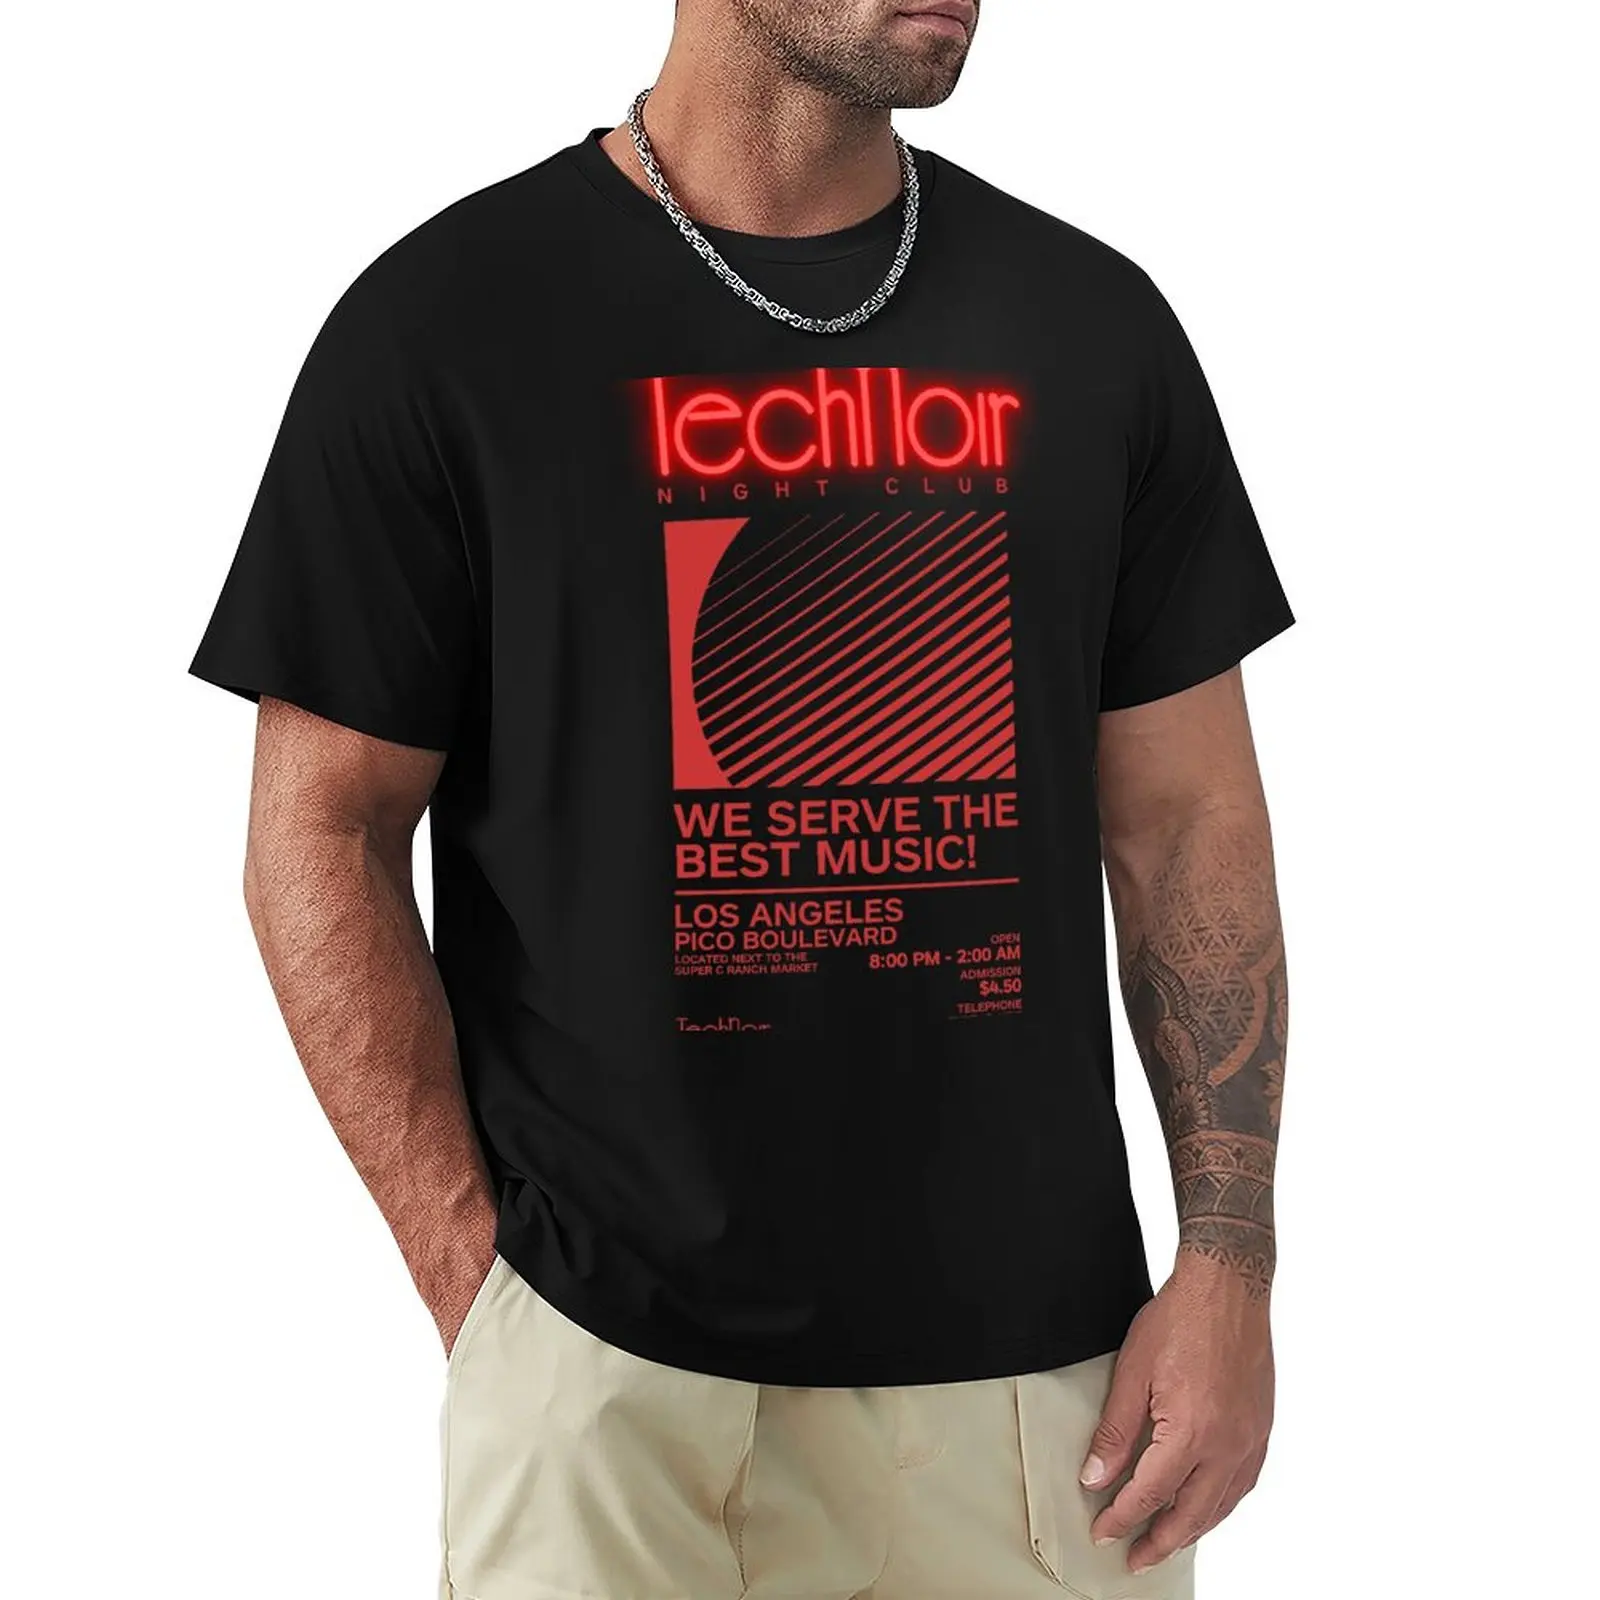 

Retro 80s Technoir Nightclub Poster From The Terminator Movie T-Shirt Tees Man Clothes Mens T Shirt Graphic